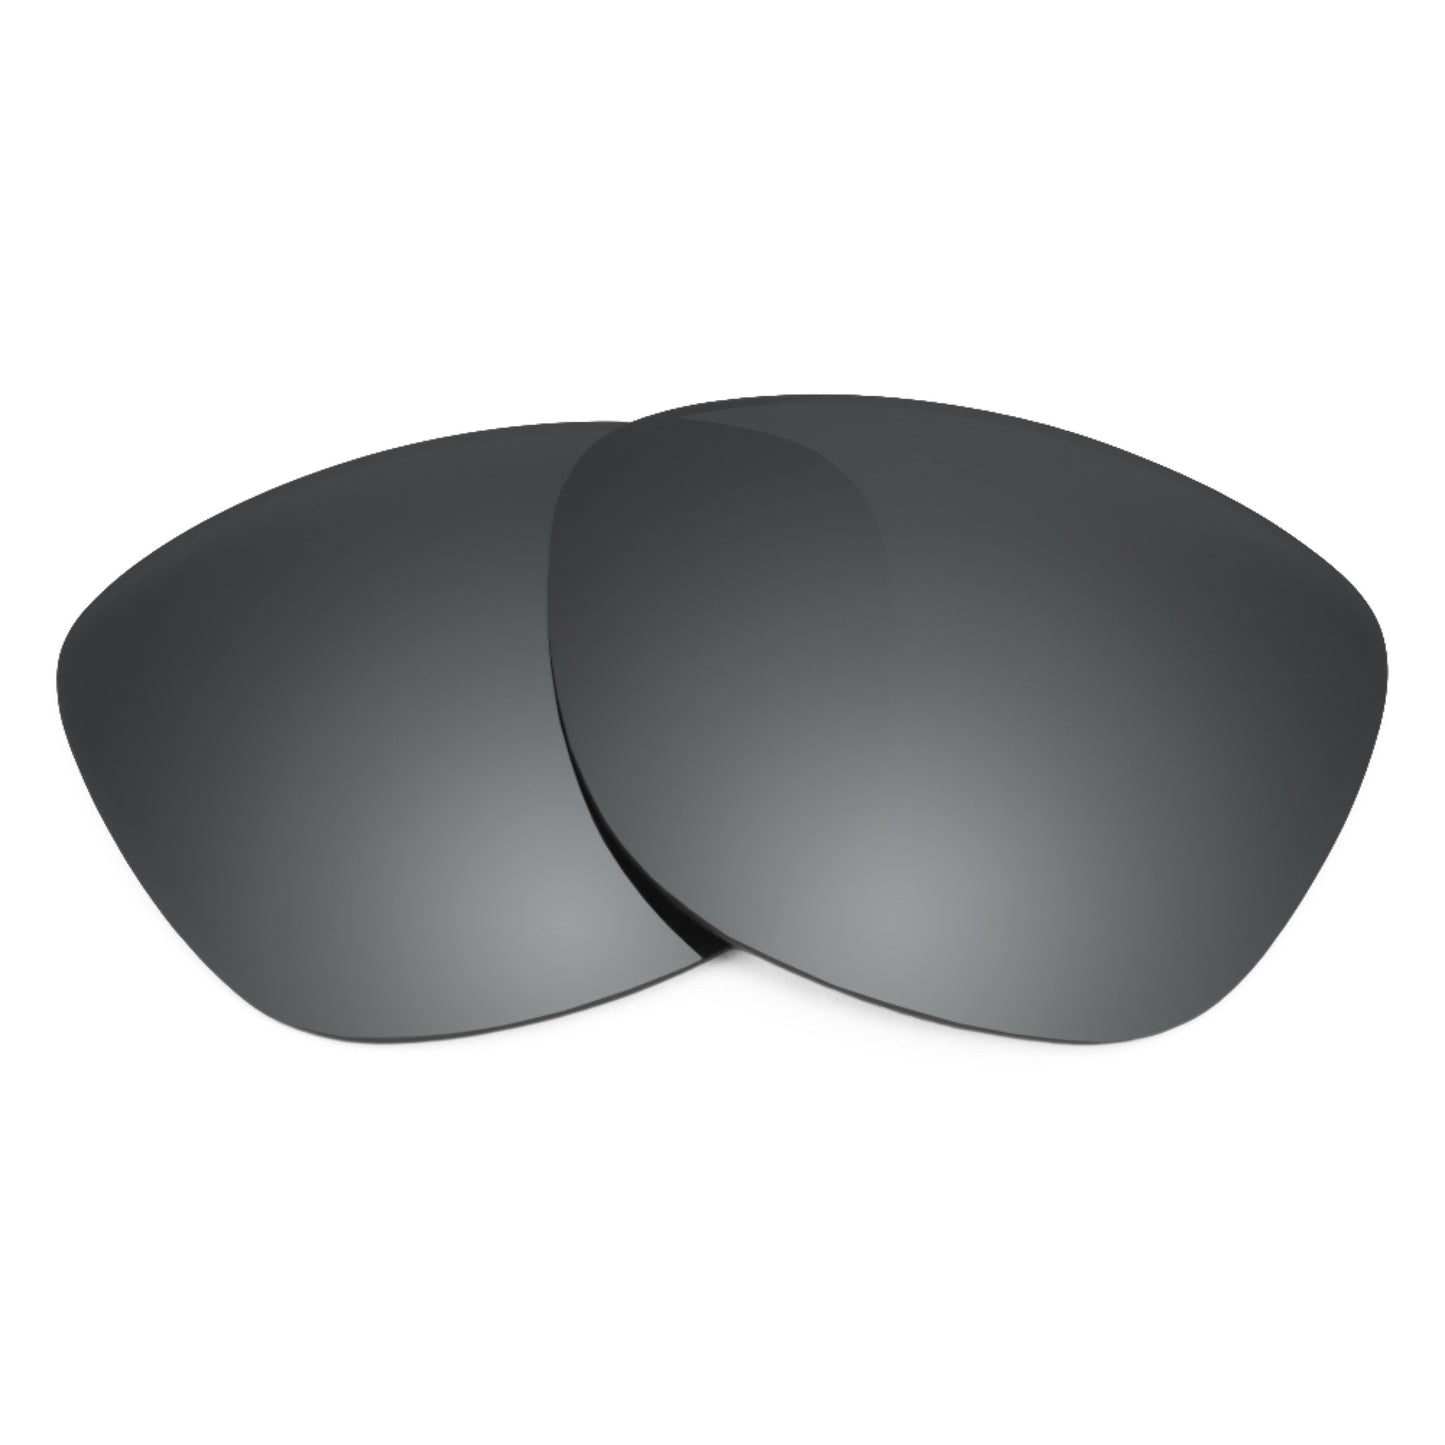 Revant replacement lenses for Ray-Ban Justin RB4165 51mm Non-Polarized Black Chrome